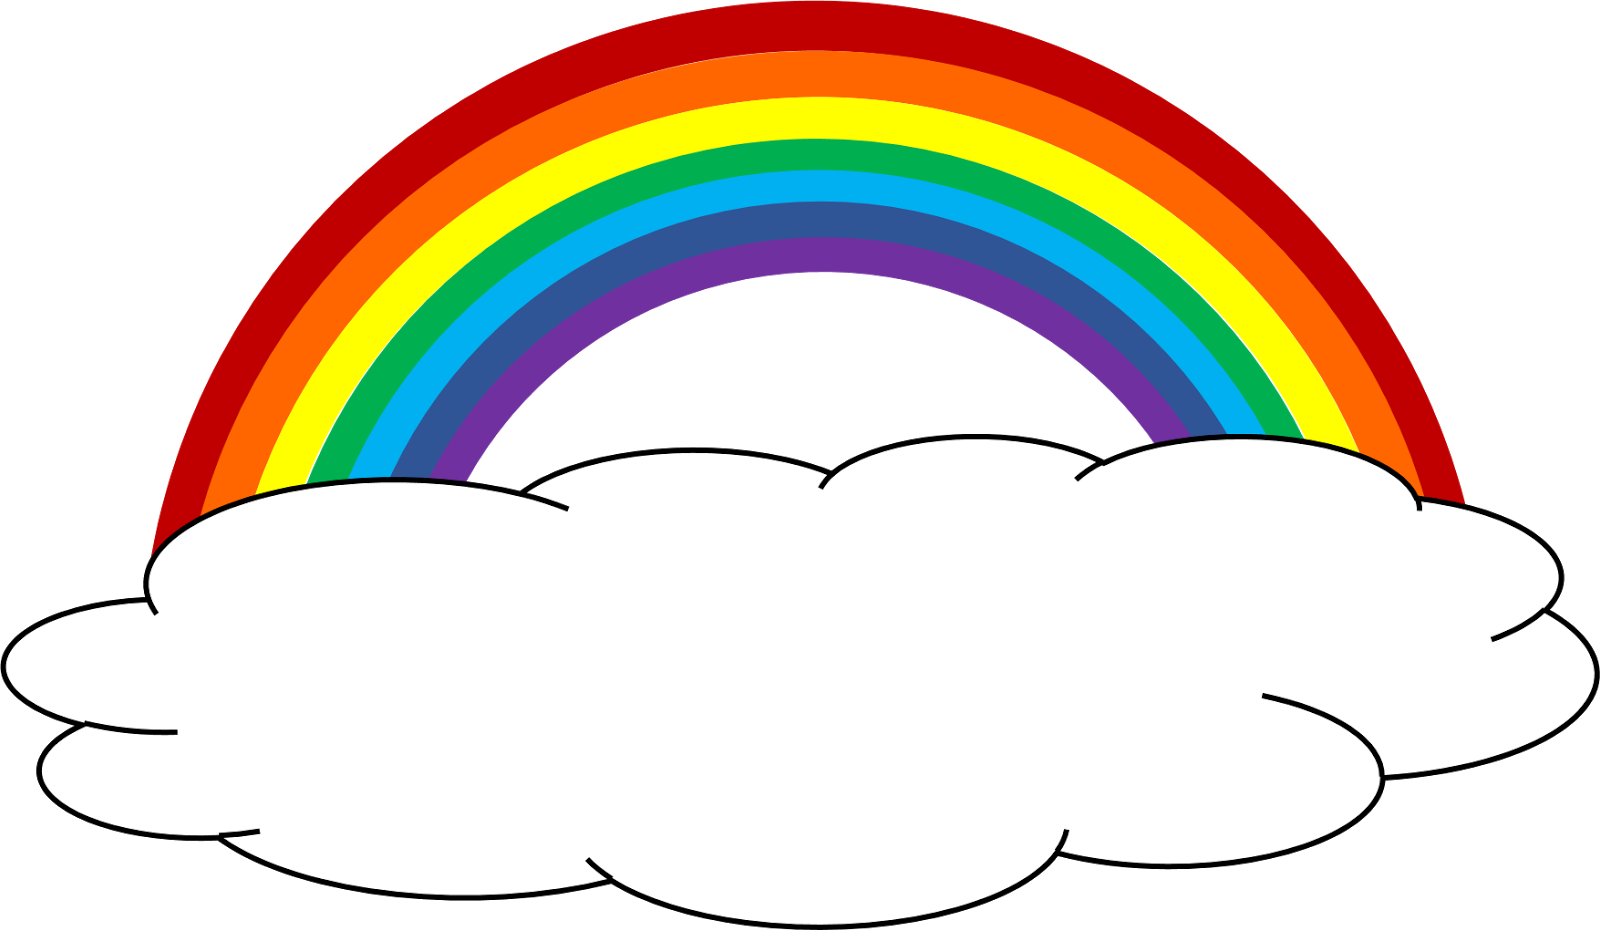 Clouds and rainbow clipart clipartxtras